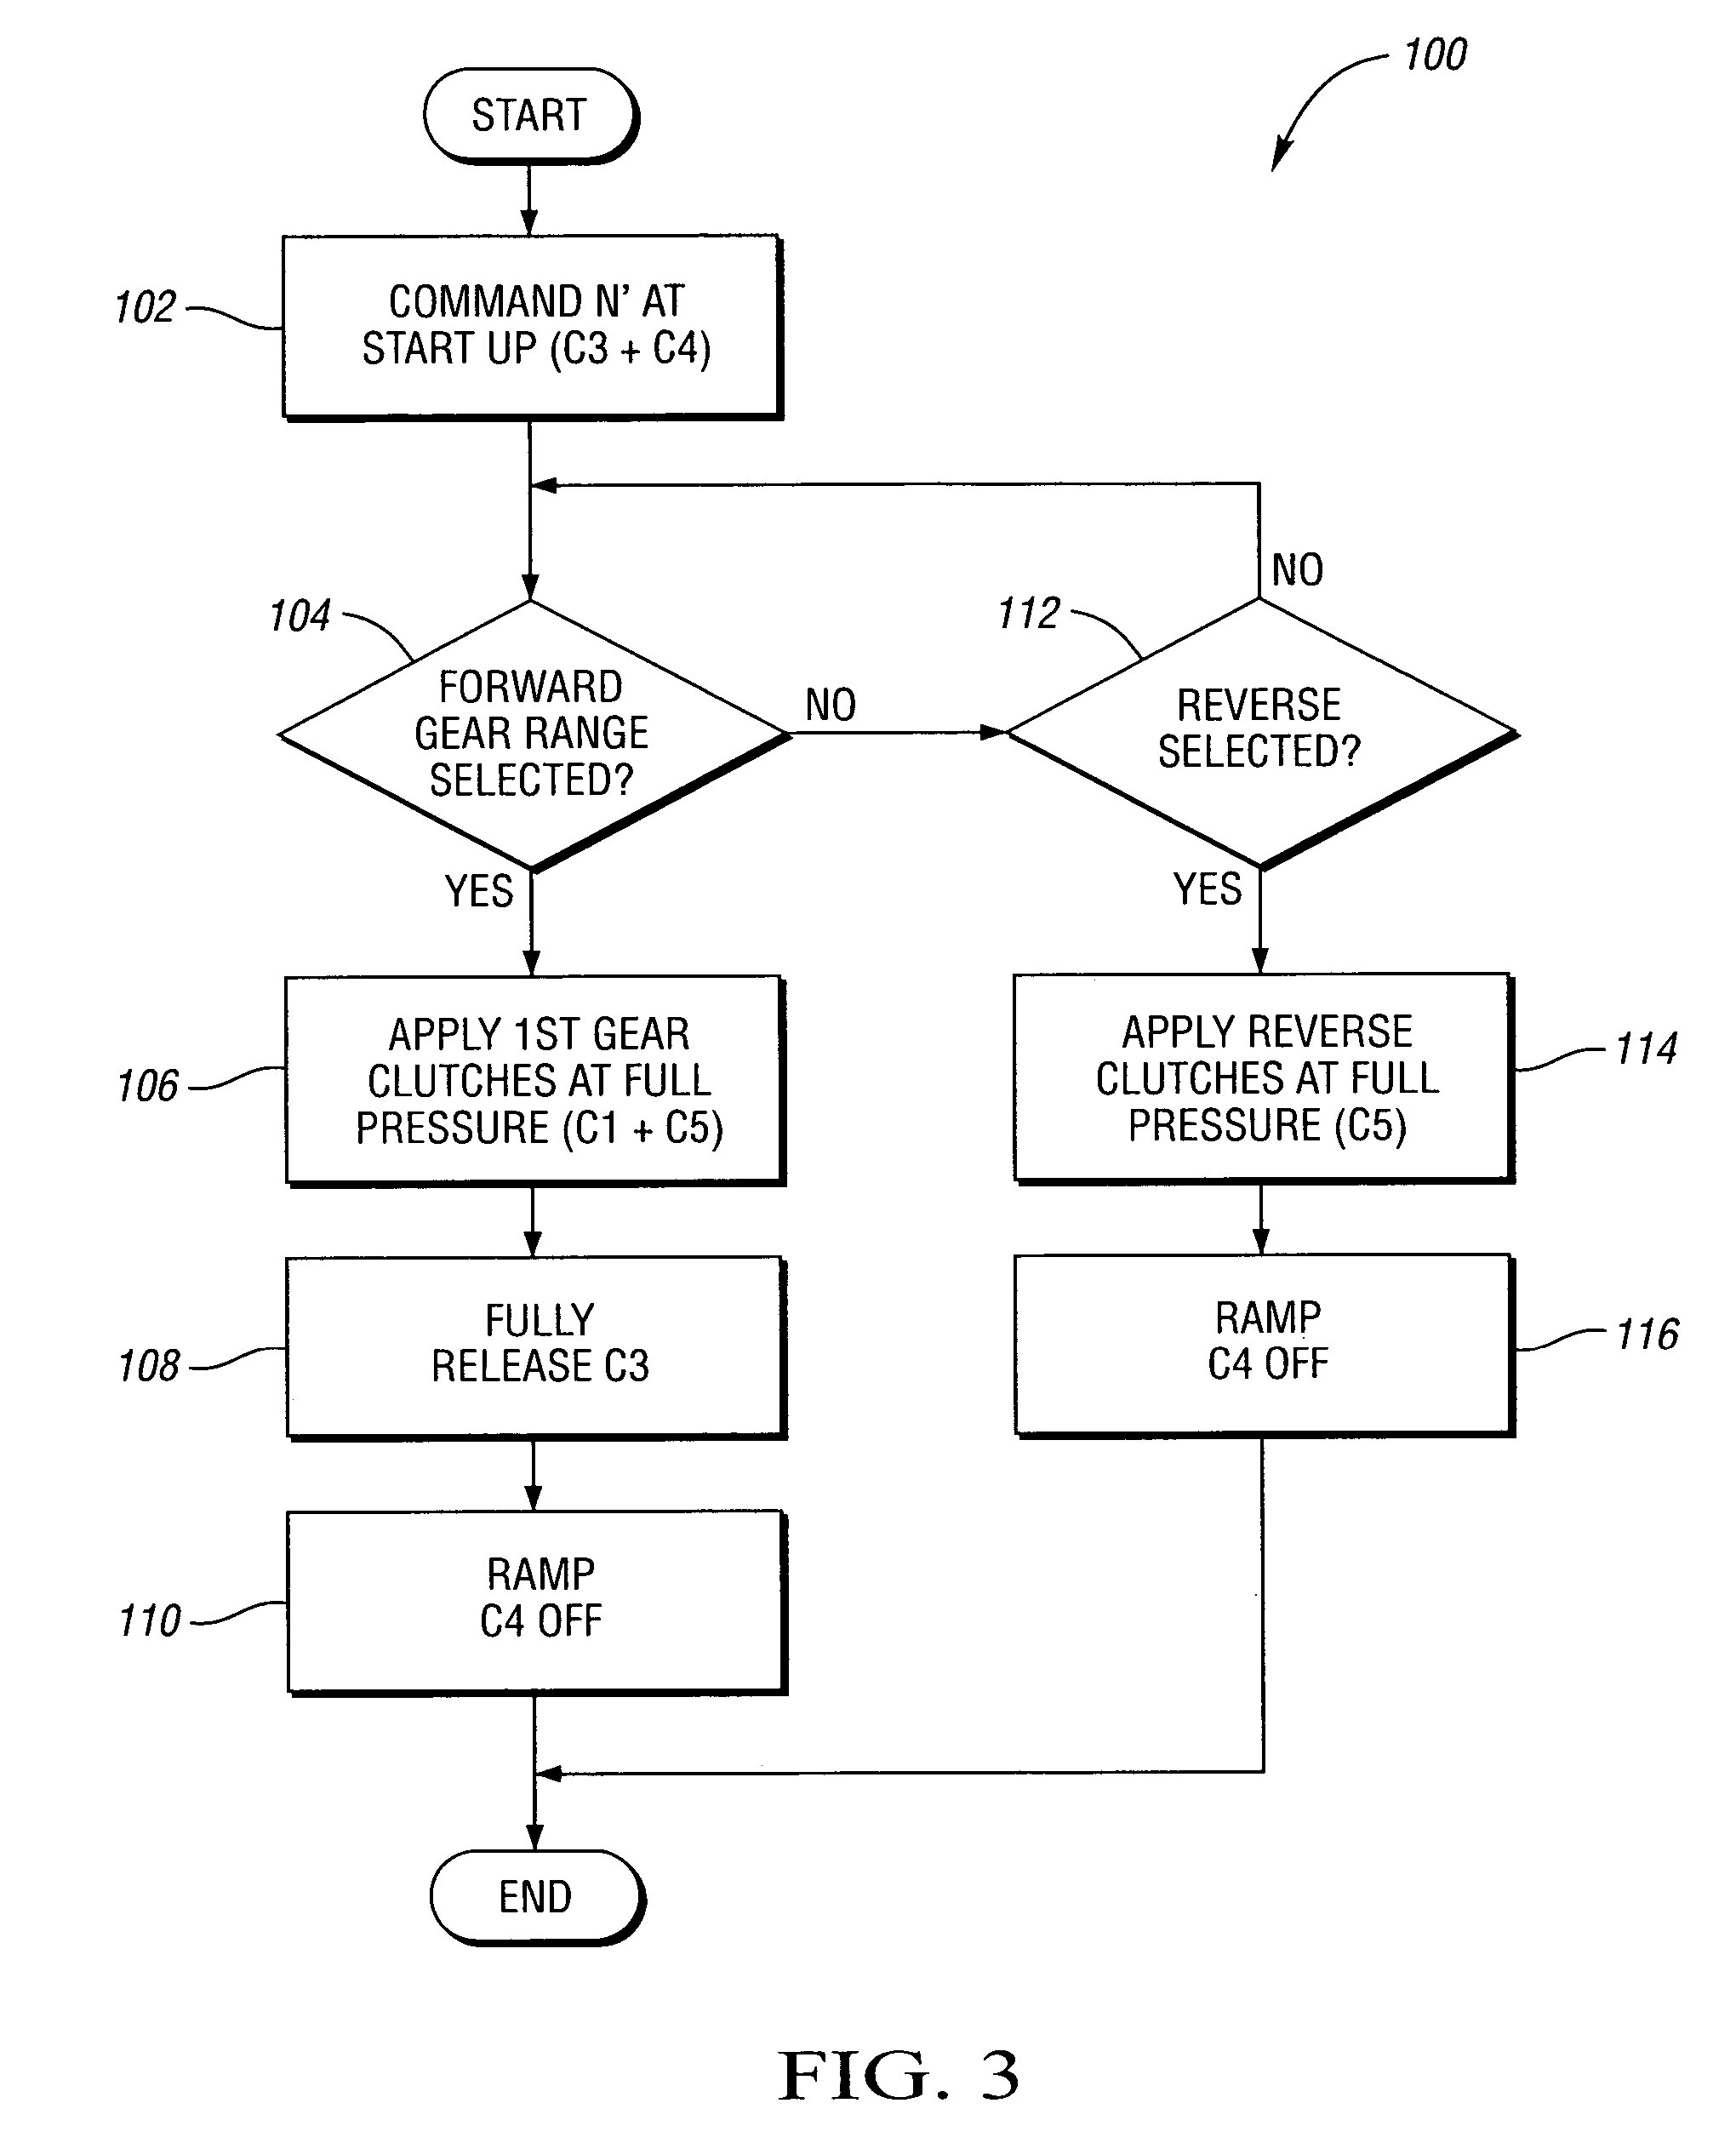 Method for performing high throttle neutral to range shifts